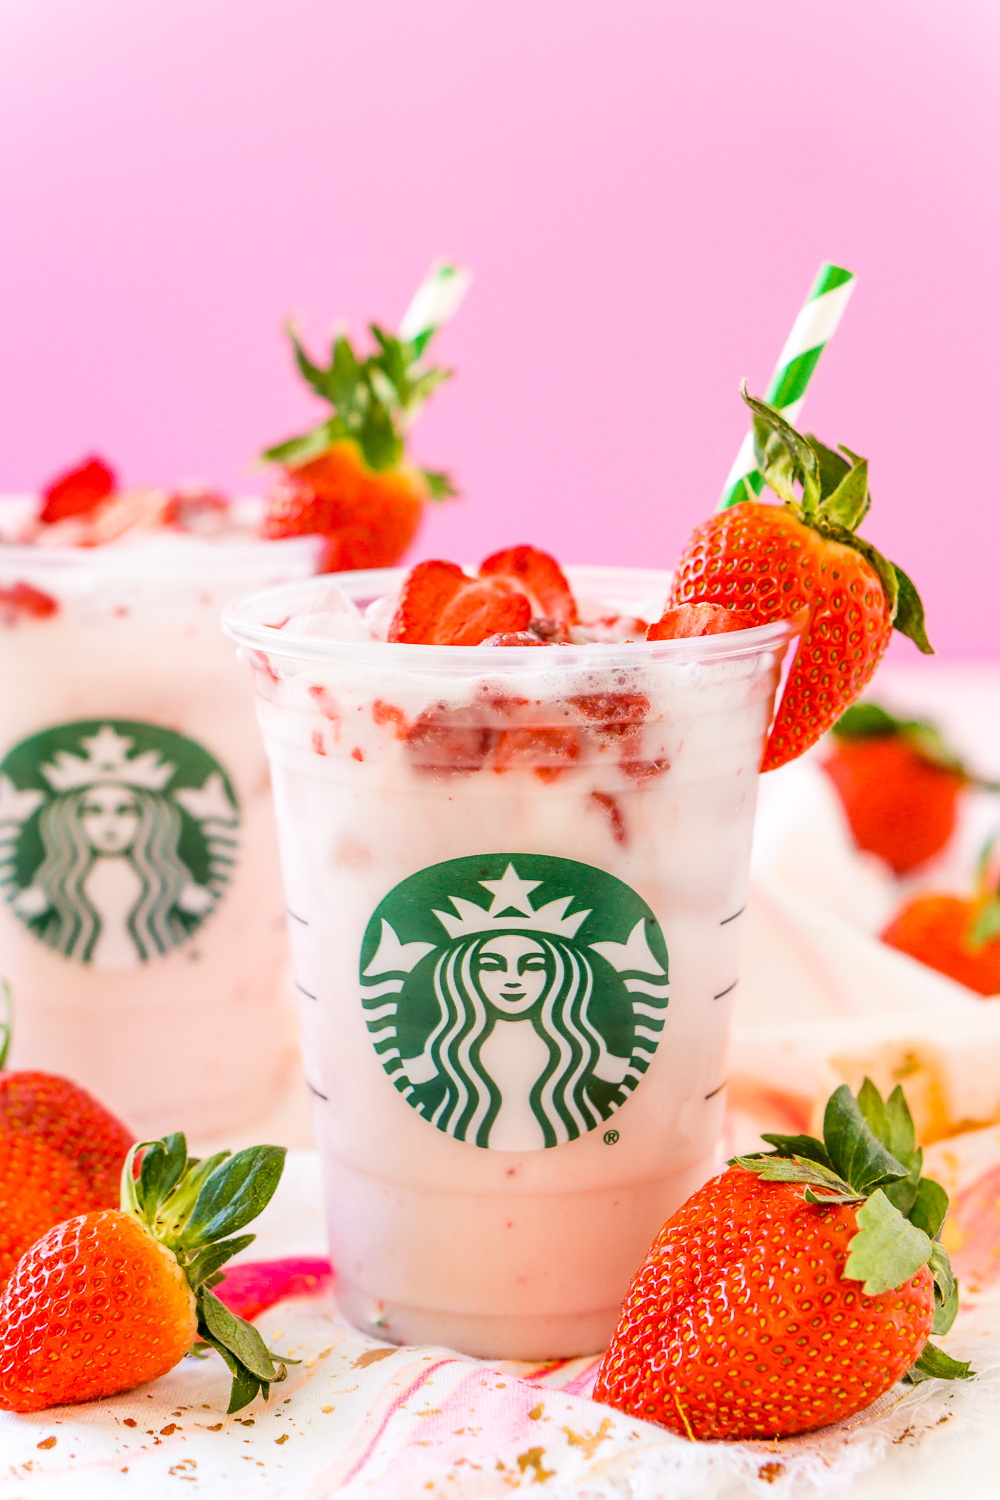 How To Draw A Pink Drink From Starbucks